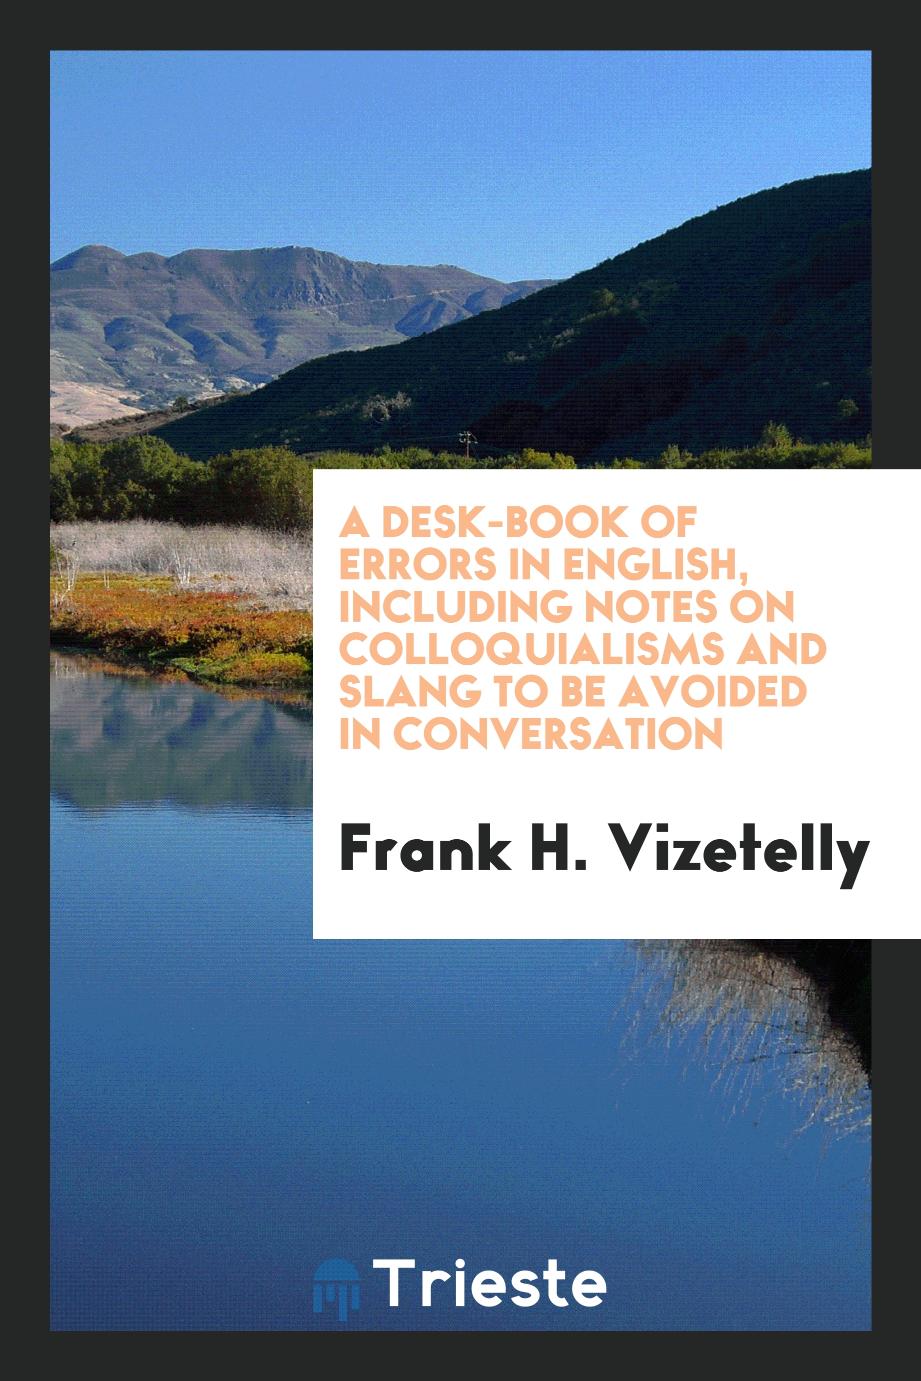 A desk-book of errors in English, including notes on colloquialisms and slang to be avoided in conversation